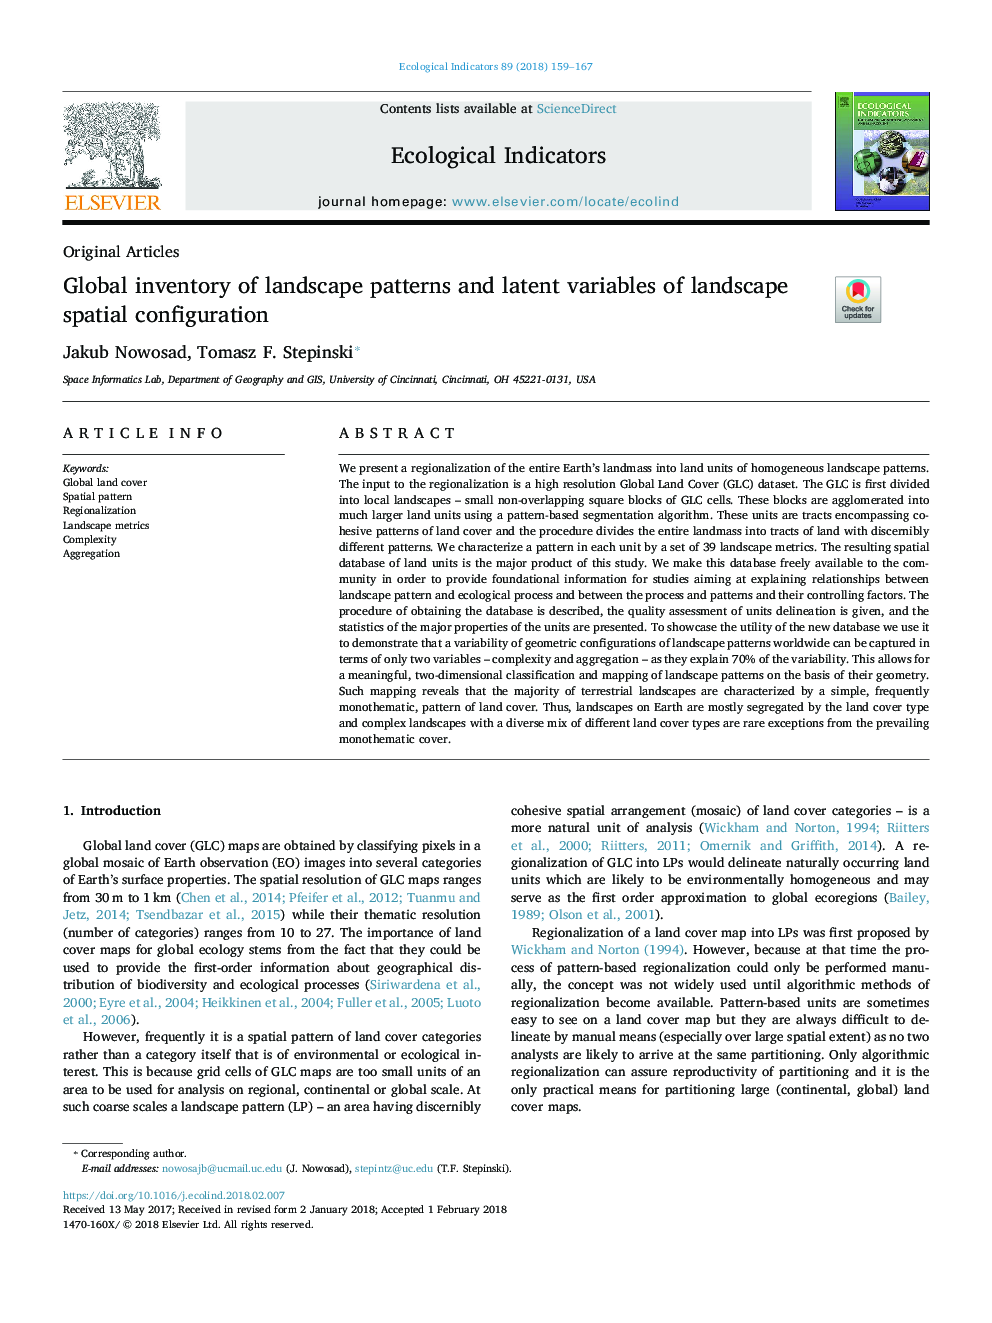 Global inventory of landscape patterns and latent variables of landscape spatial configuration